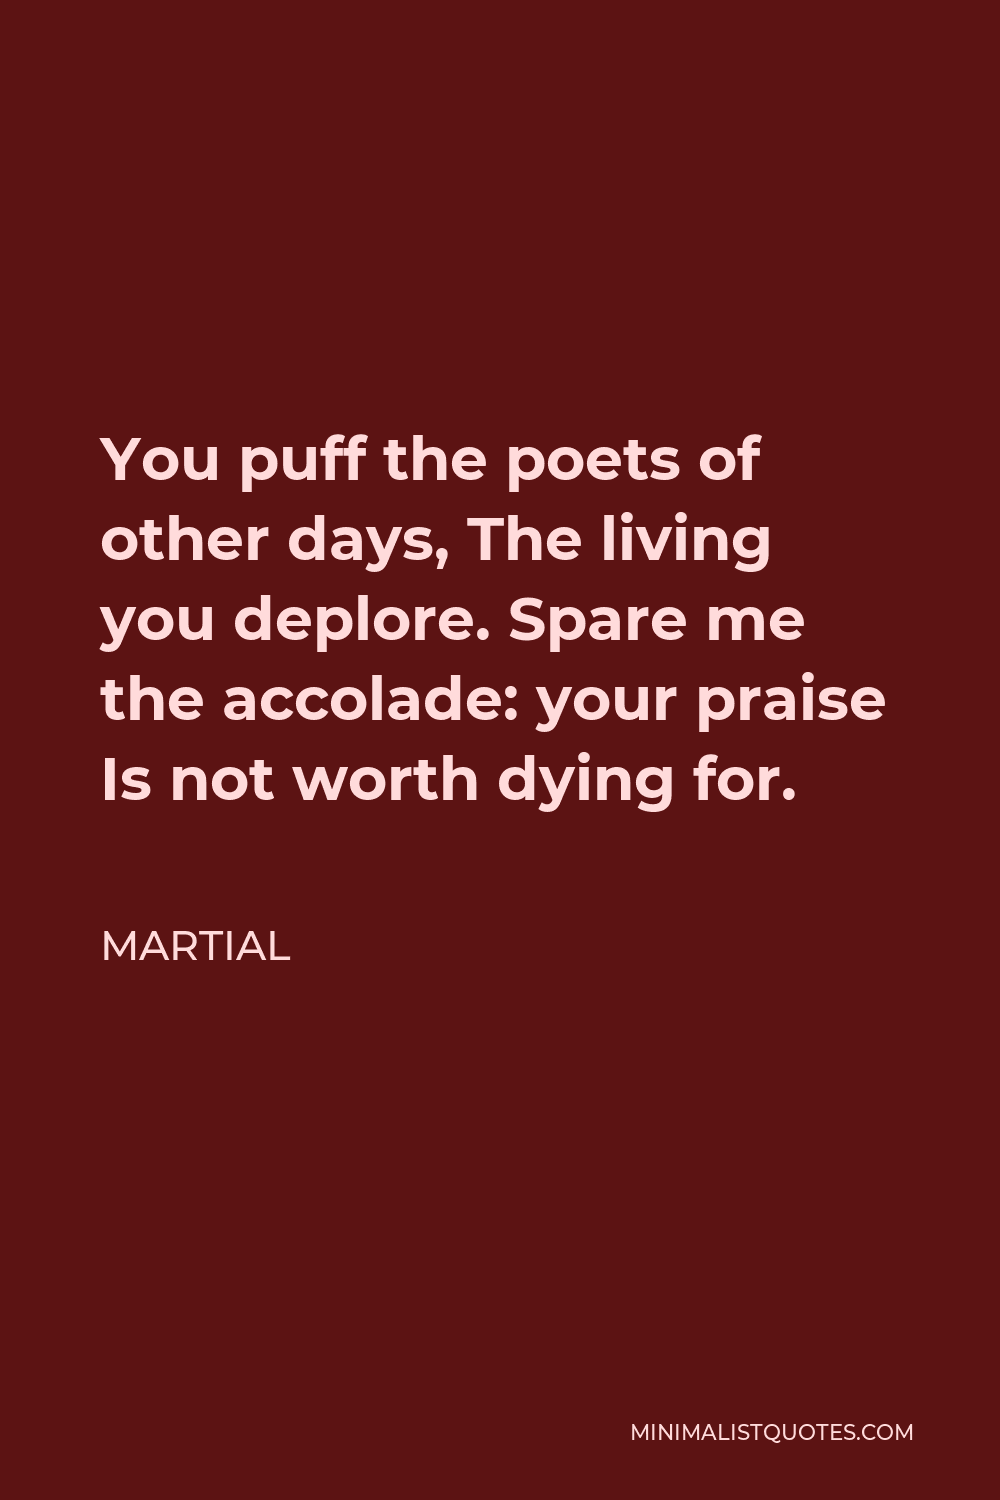 Martial Quote - You puff the poets of other days, The living you deplore. Spare me the accolade: your praise Is not worth dying for.